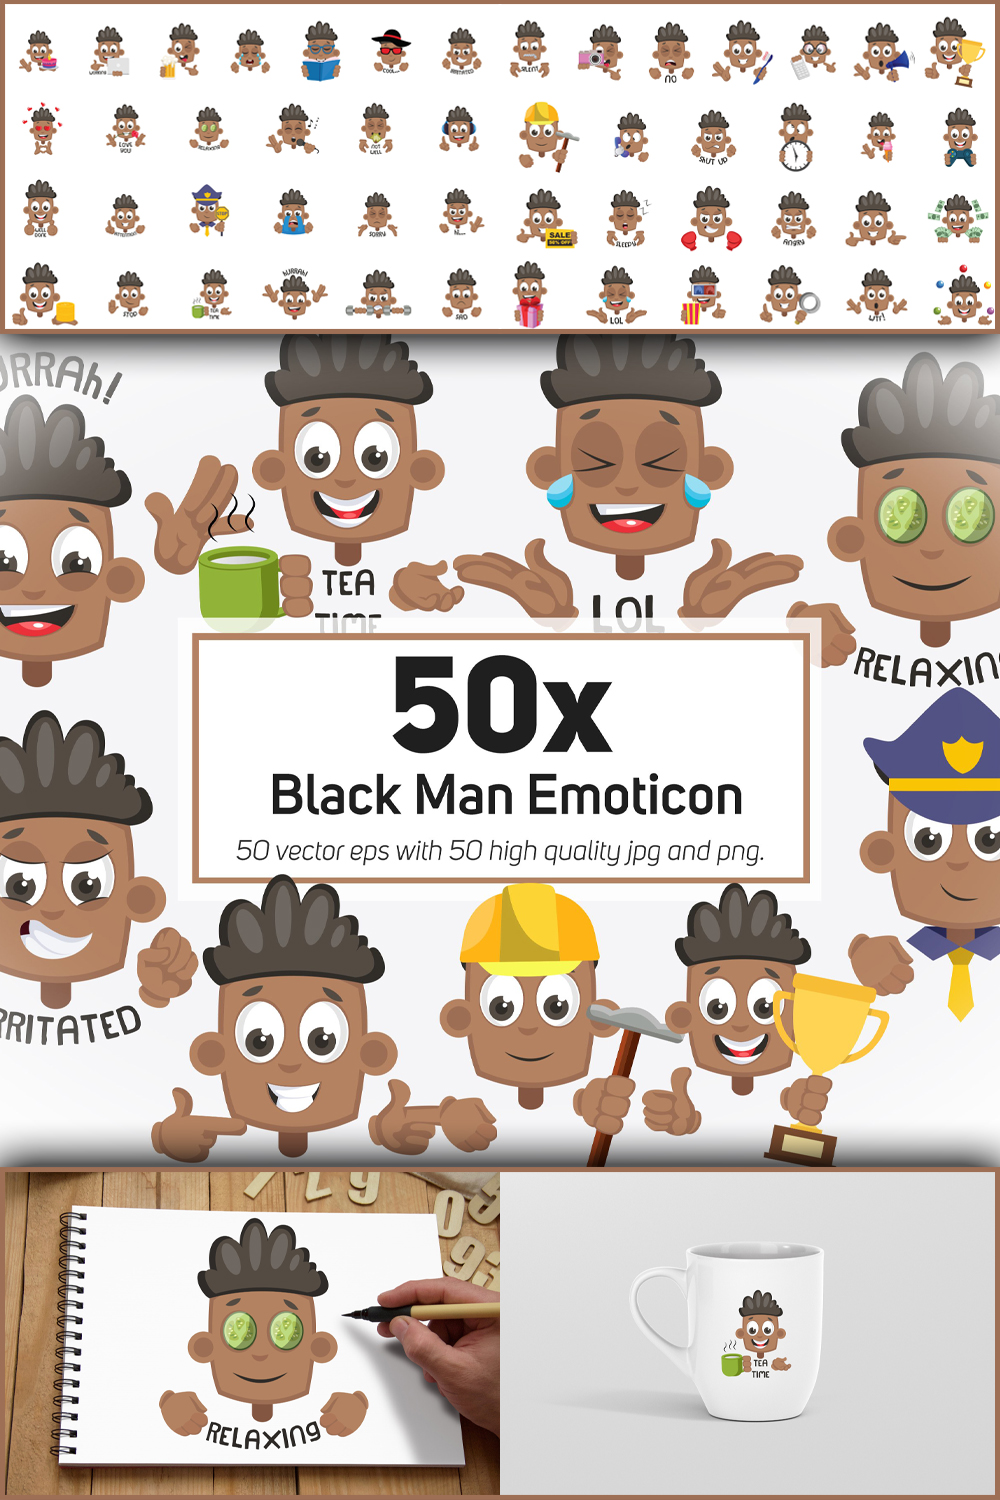 545213 50x black man emoticon or sticker character collec pinterest 1000 1500 613